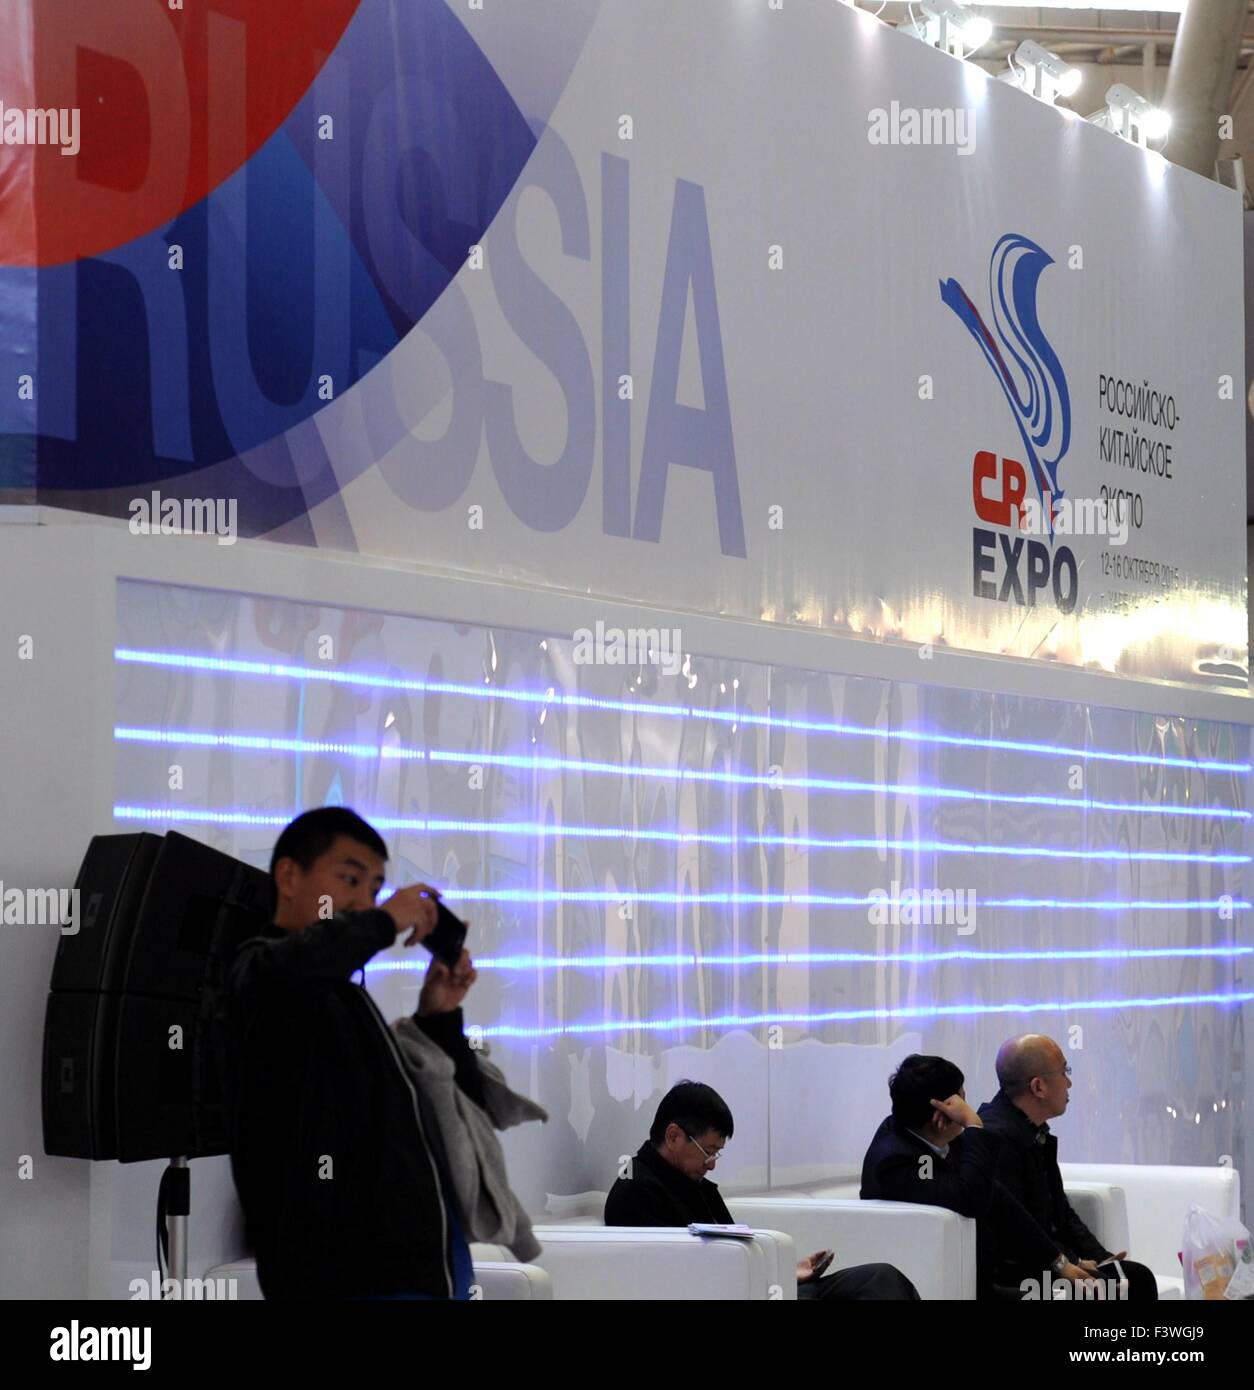 (151013) -- HARBIN, Oct. 13, 2015 (Xinhua) -- A Chinese visitor takes photos at the booth of Russia during the second China-Russia Exposition in Harbin, northeast China's Heilongjiang Province, Oct. 13, 2015. Nearly 10,000 businessmen from 103 countries and regions attended the expo. The event will last till Oct. 16, 2015.(Xinhua/Wang Song)  (zhs) Stock Photo